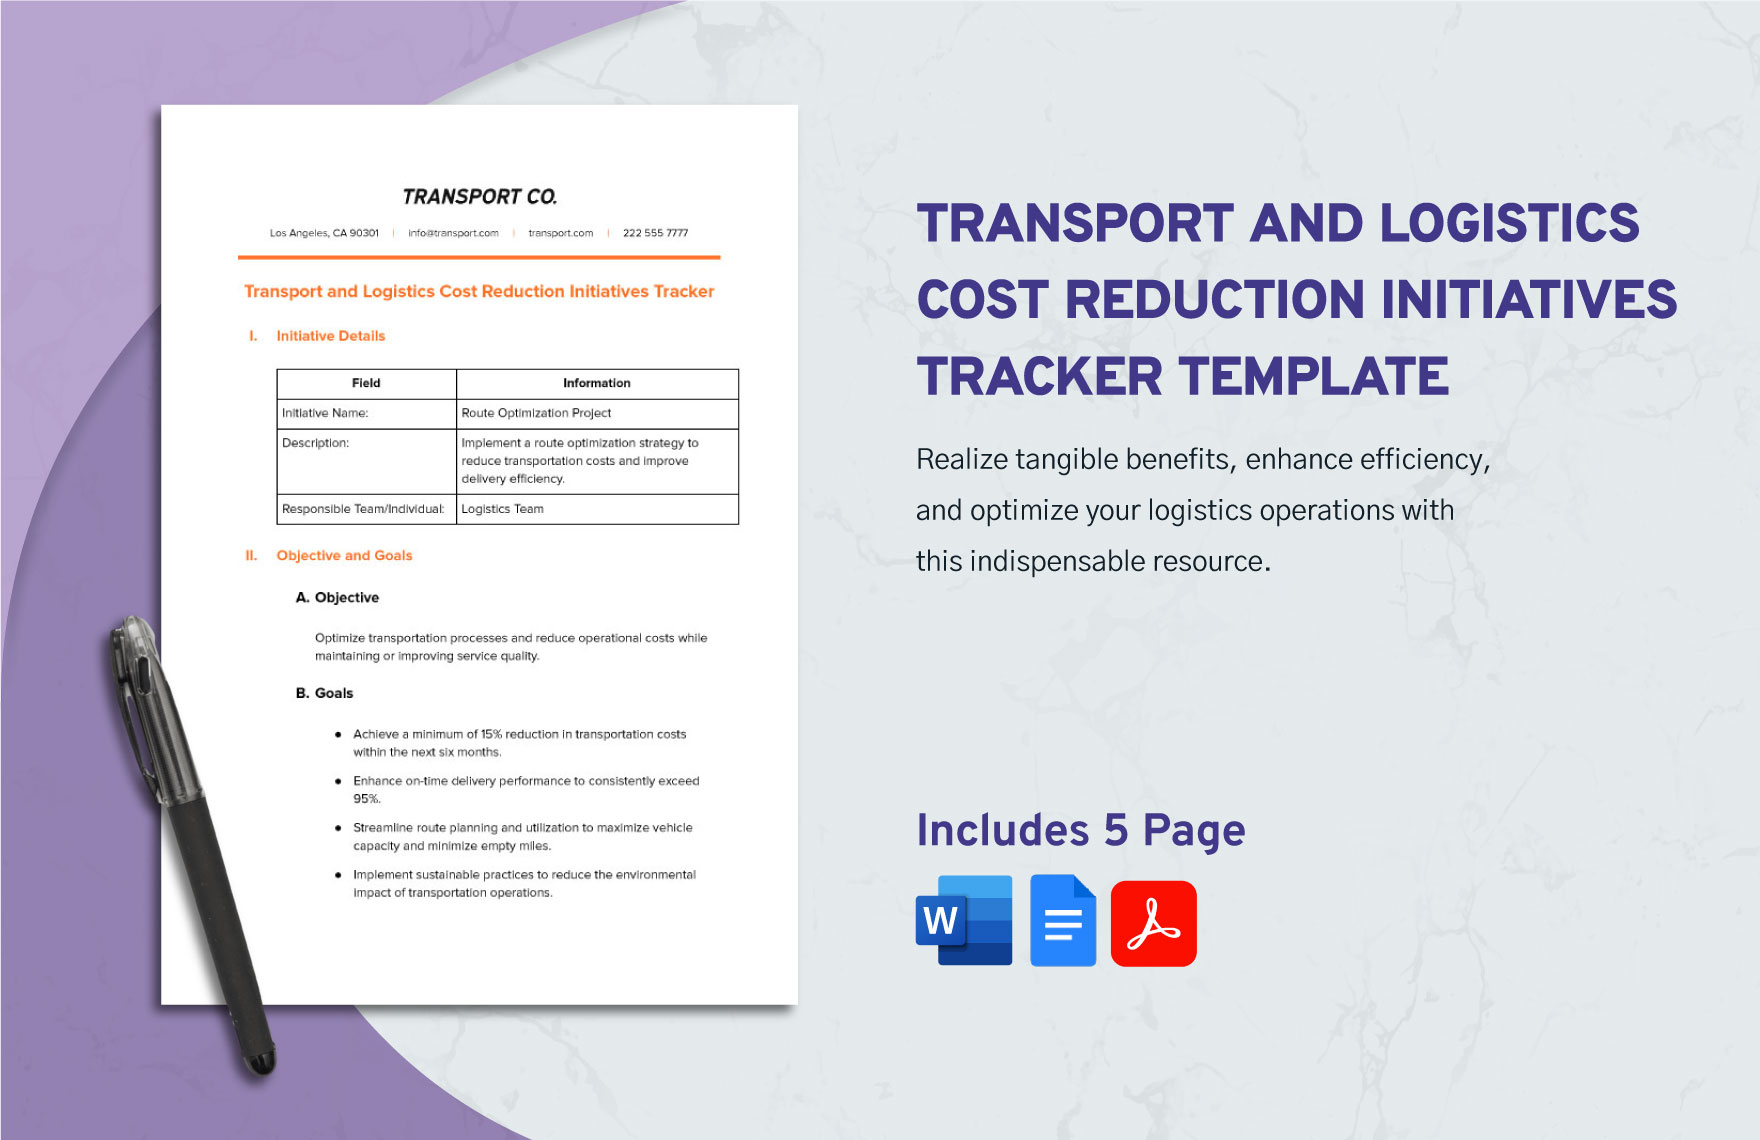 Transport and Logistics Cost Reduction Initiatives Tracker Template